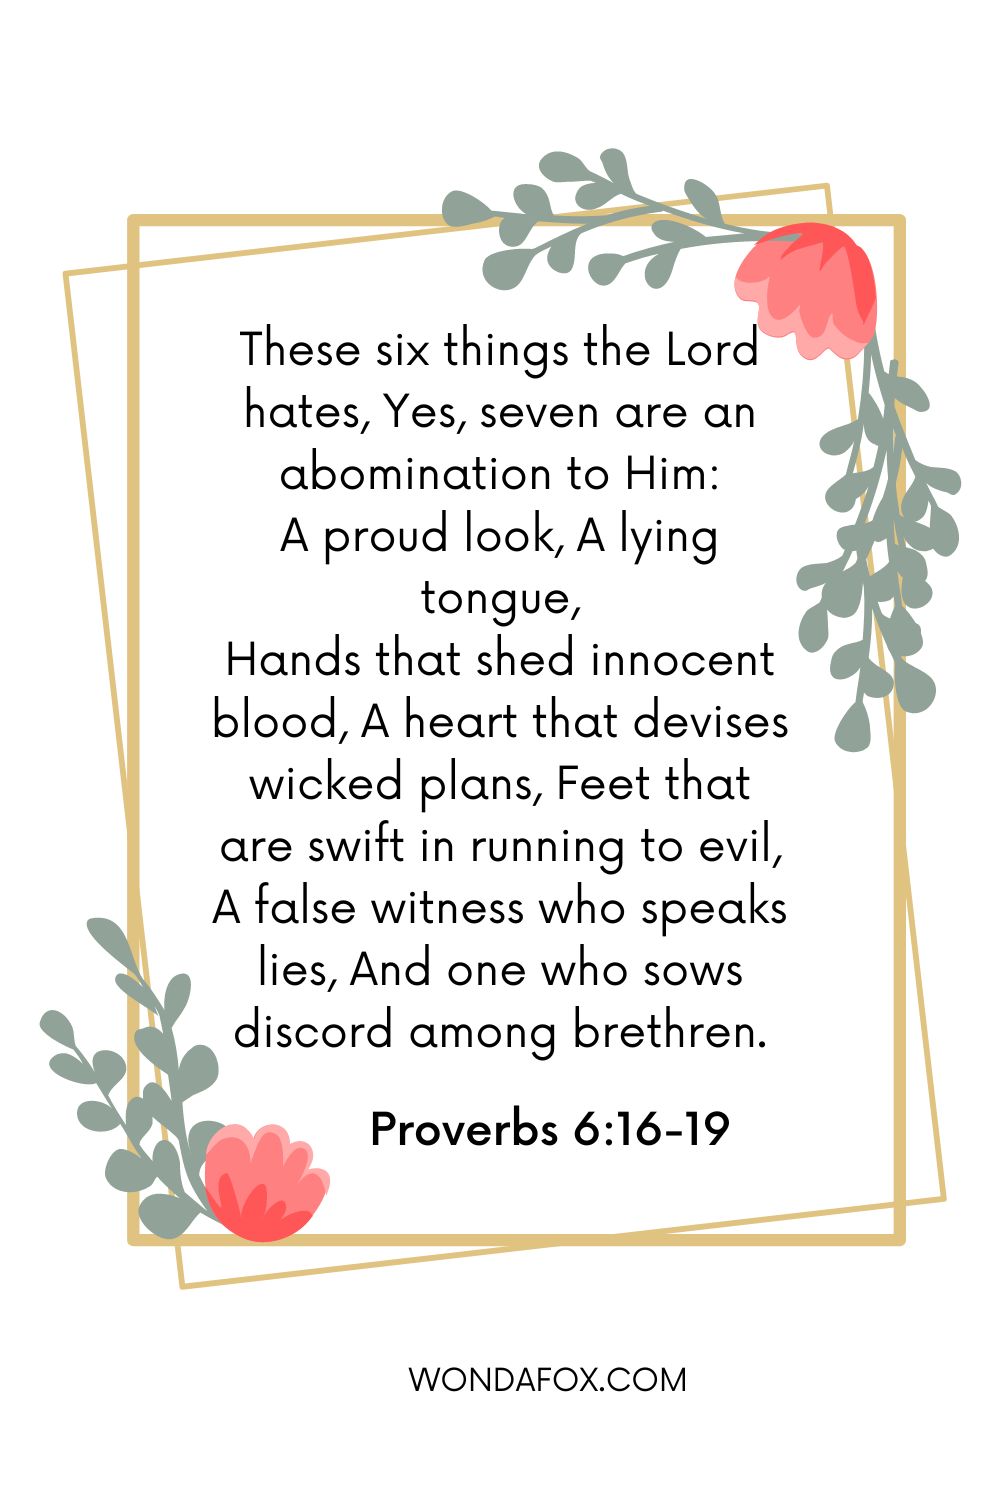 These six things the Lord hates, Yes, seven are an abomination to Him: - Bible Verses About Hatred 